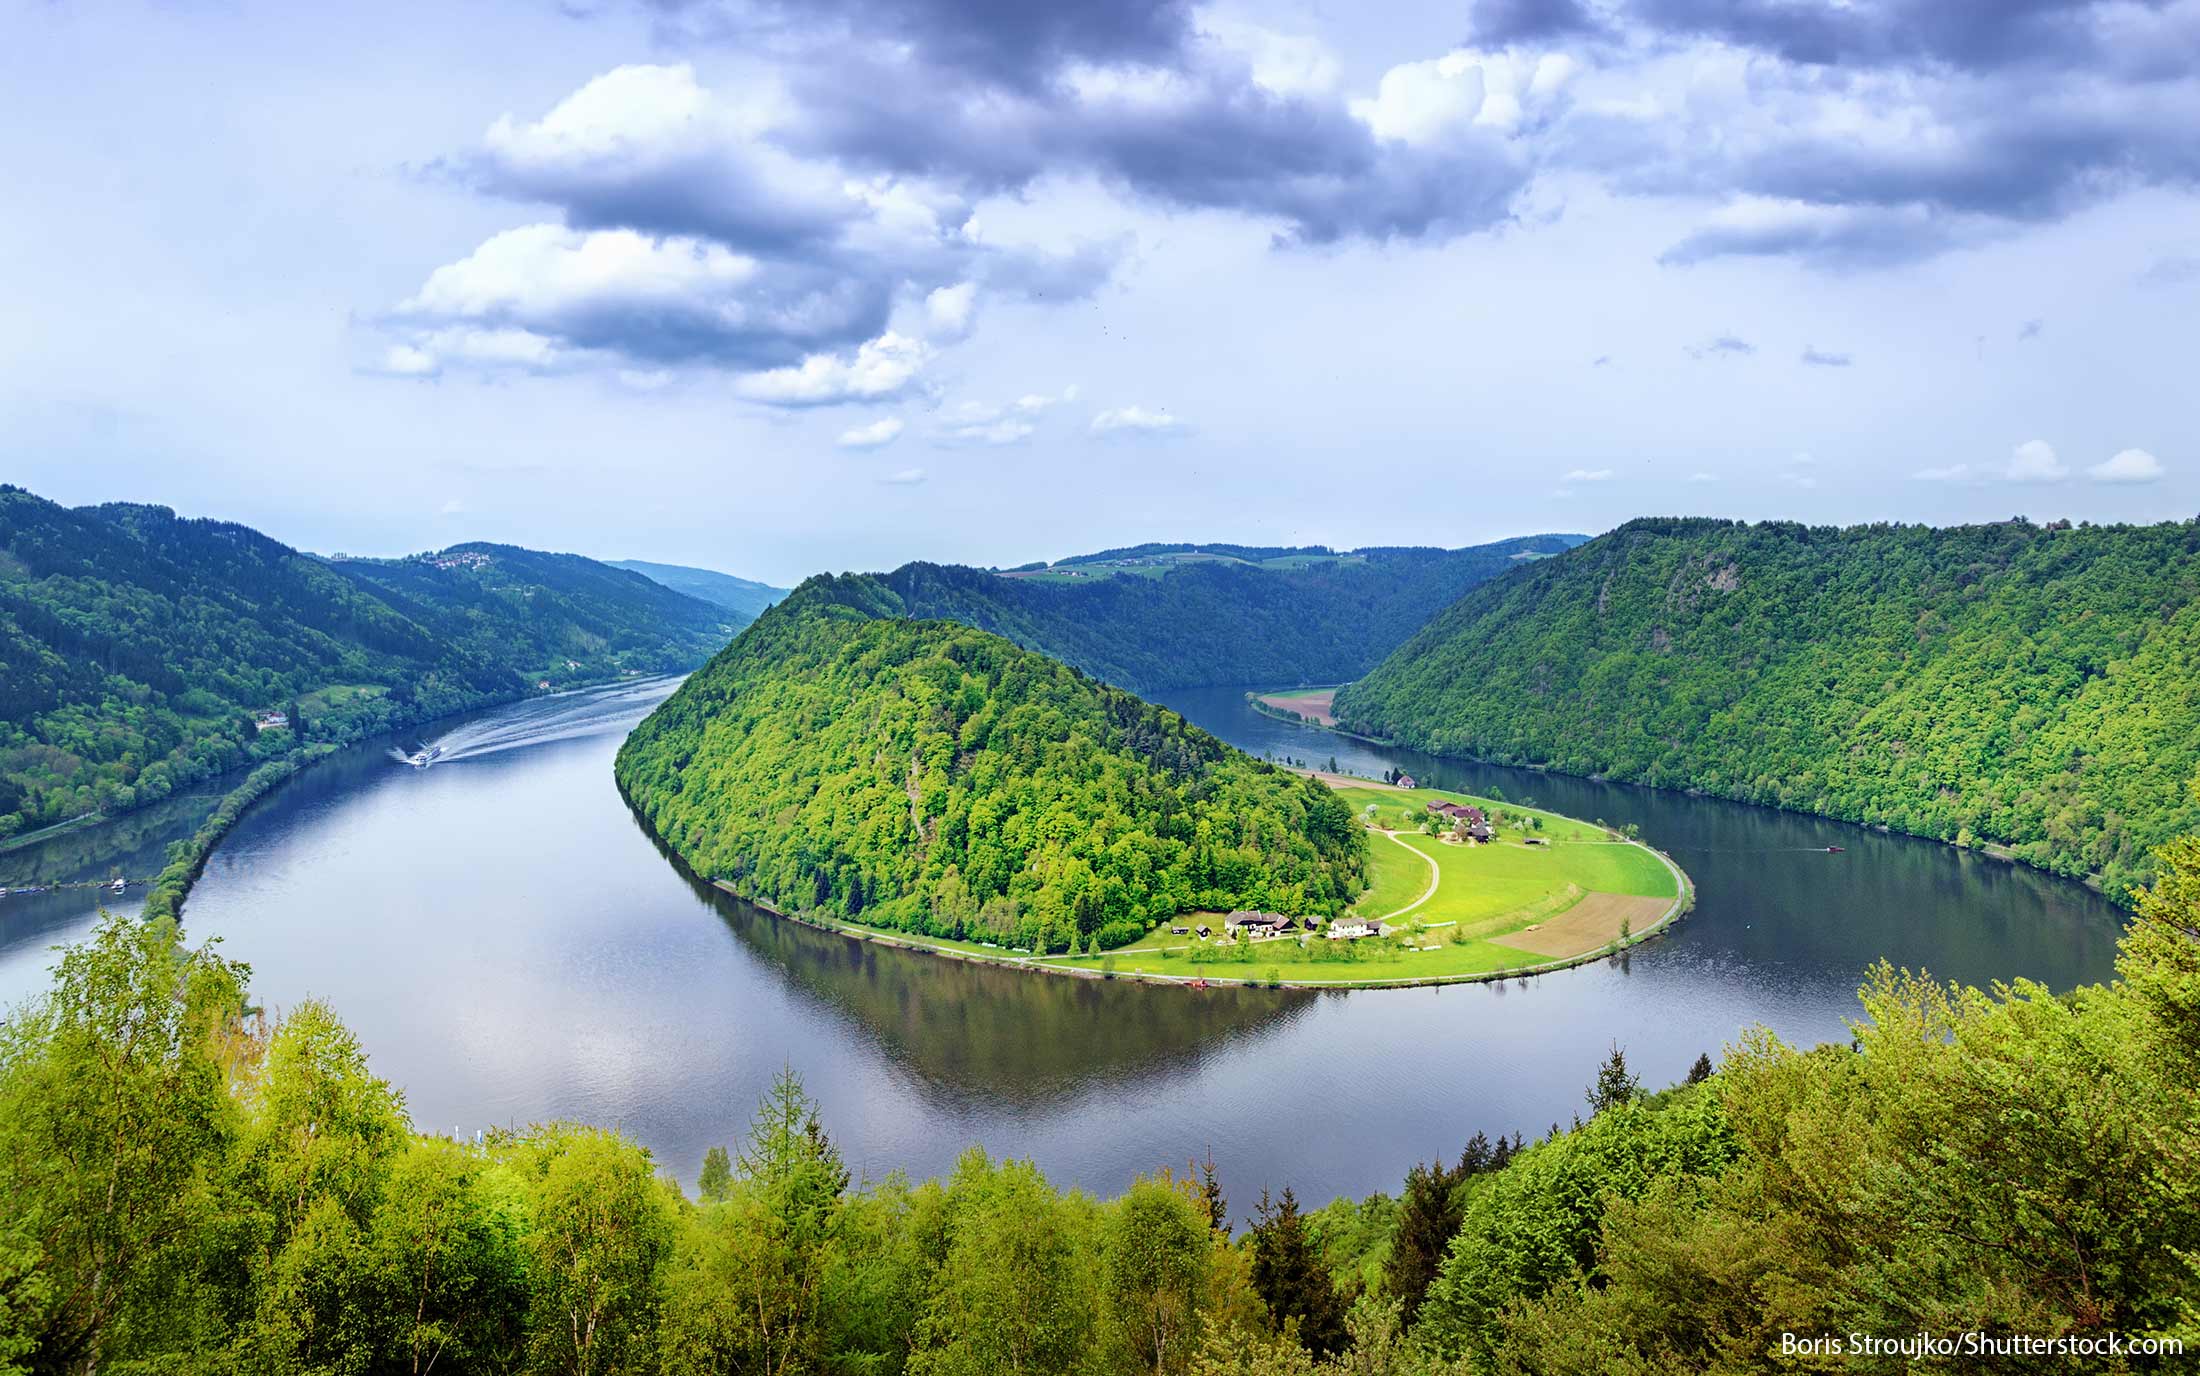 <ul> <li>Prices for Viking's "Romantic Danube" cruise start at $2,199.</li> </ul> <p>You can book cruises with Viking, which reach an attractive balance between the support and guidance offered by the crew and fellow passengers, and the opportunity for solo travelers to explore on their own.</p> <p>The Romantic Danube cruise is an eight-night cruise along the Danube River from Budapest to Regensburg, with several stops along the way, including Vienna and Passau. The package includes round-trip airfare from New York City.</p>